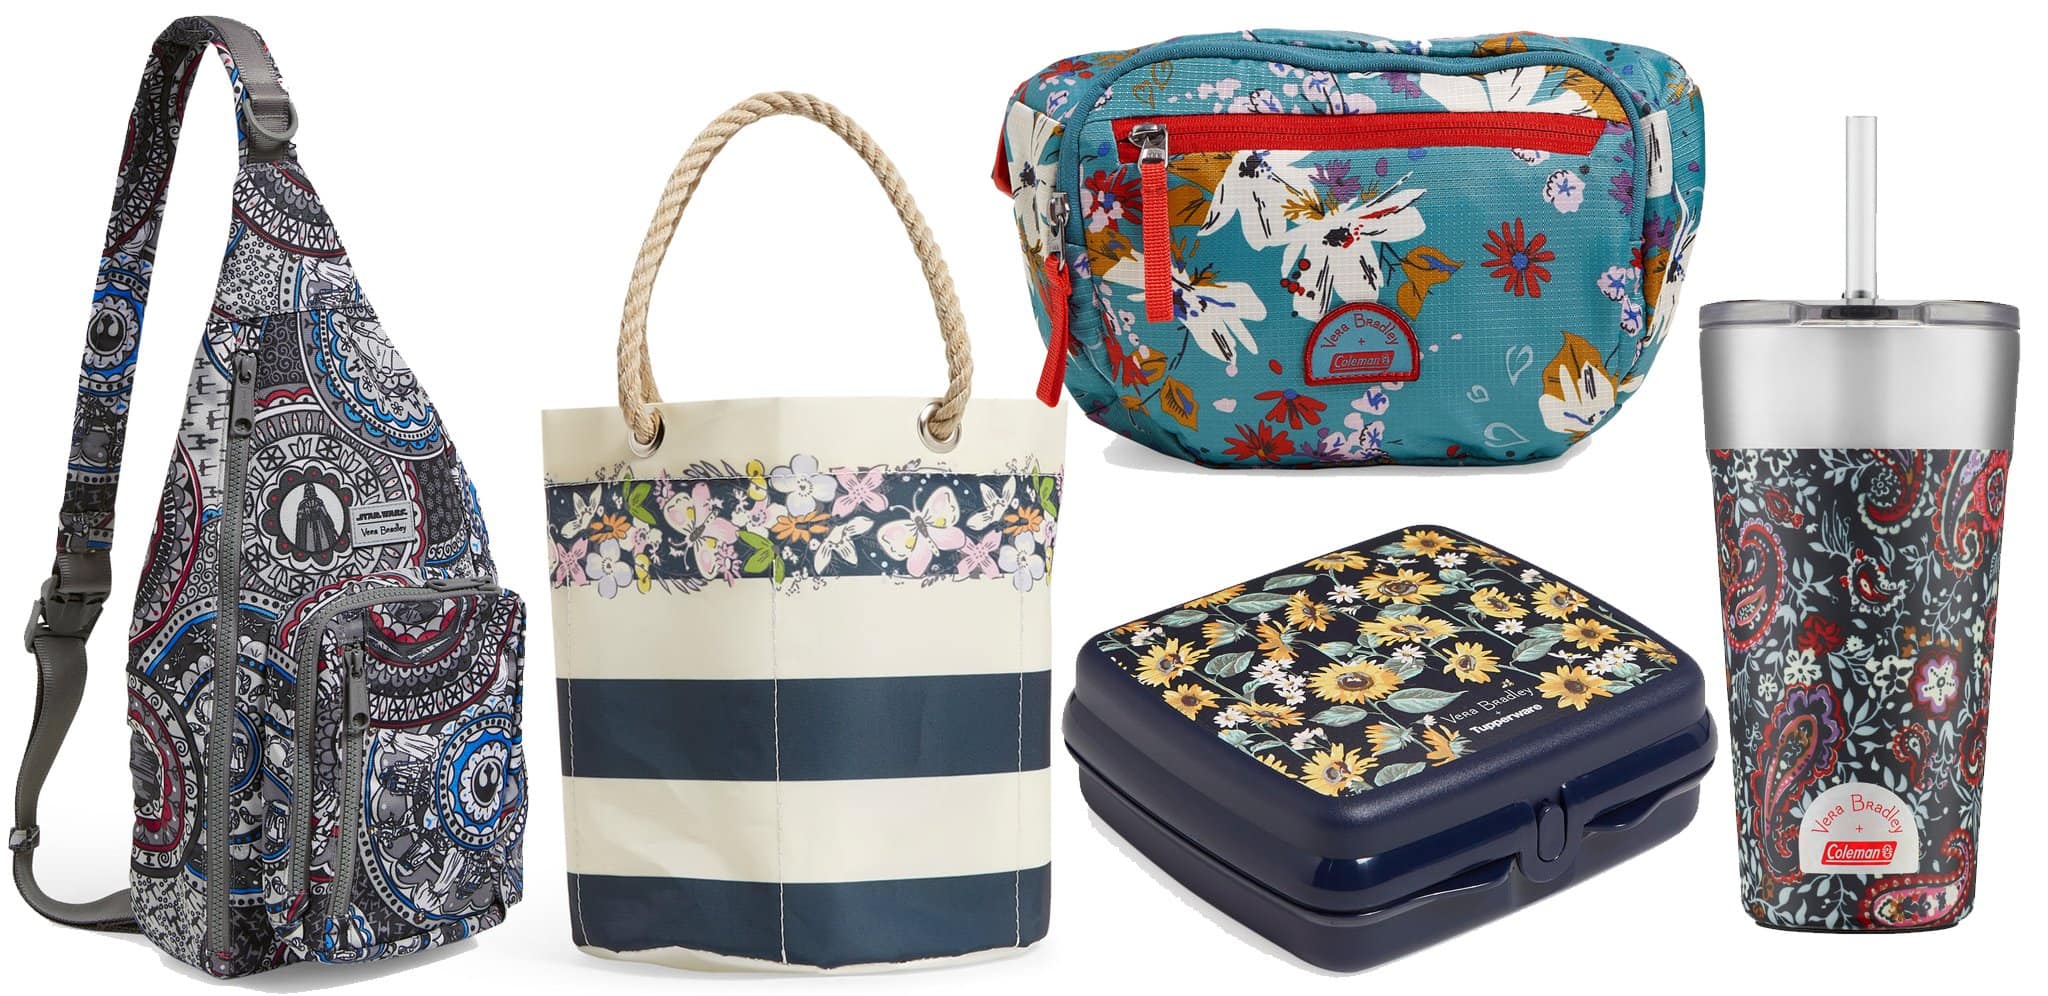 Vera Bradley has collaborated with other brands, including Sea Bags, Coleman, and Tupperware